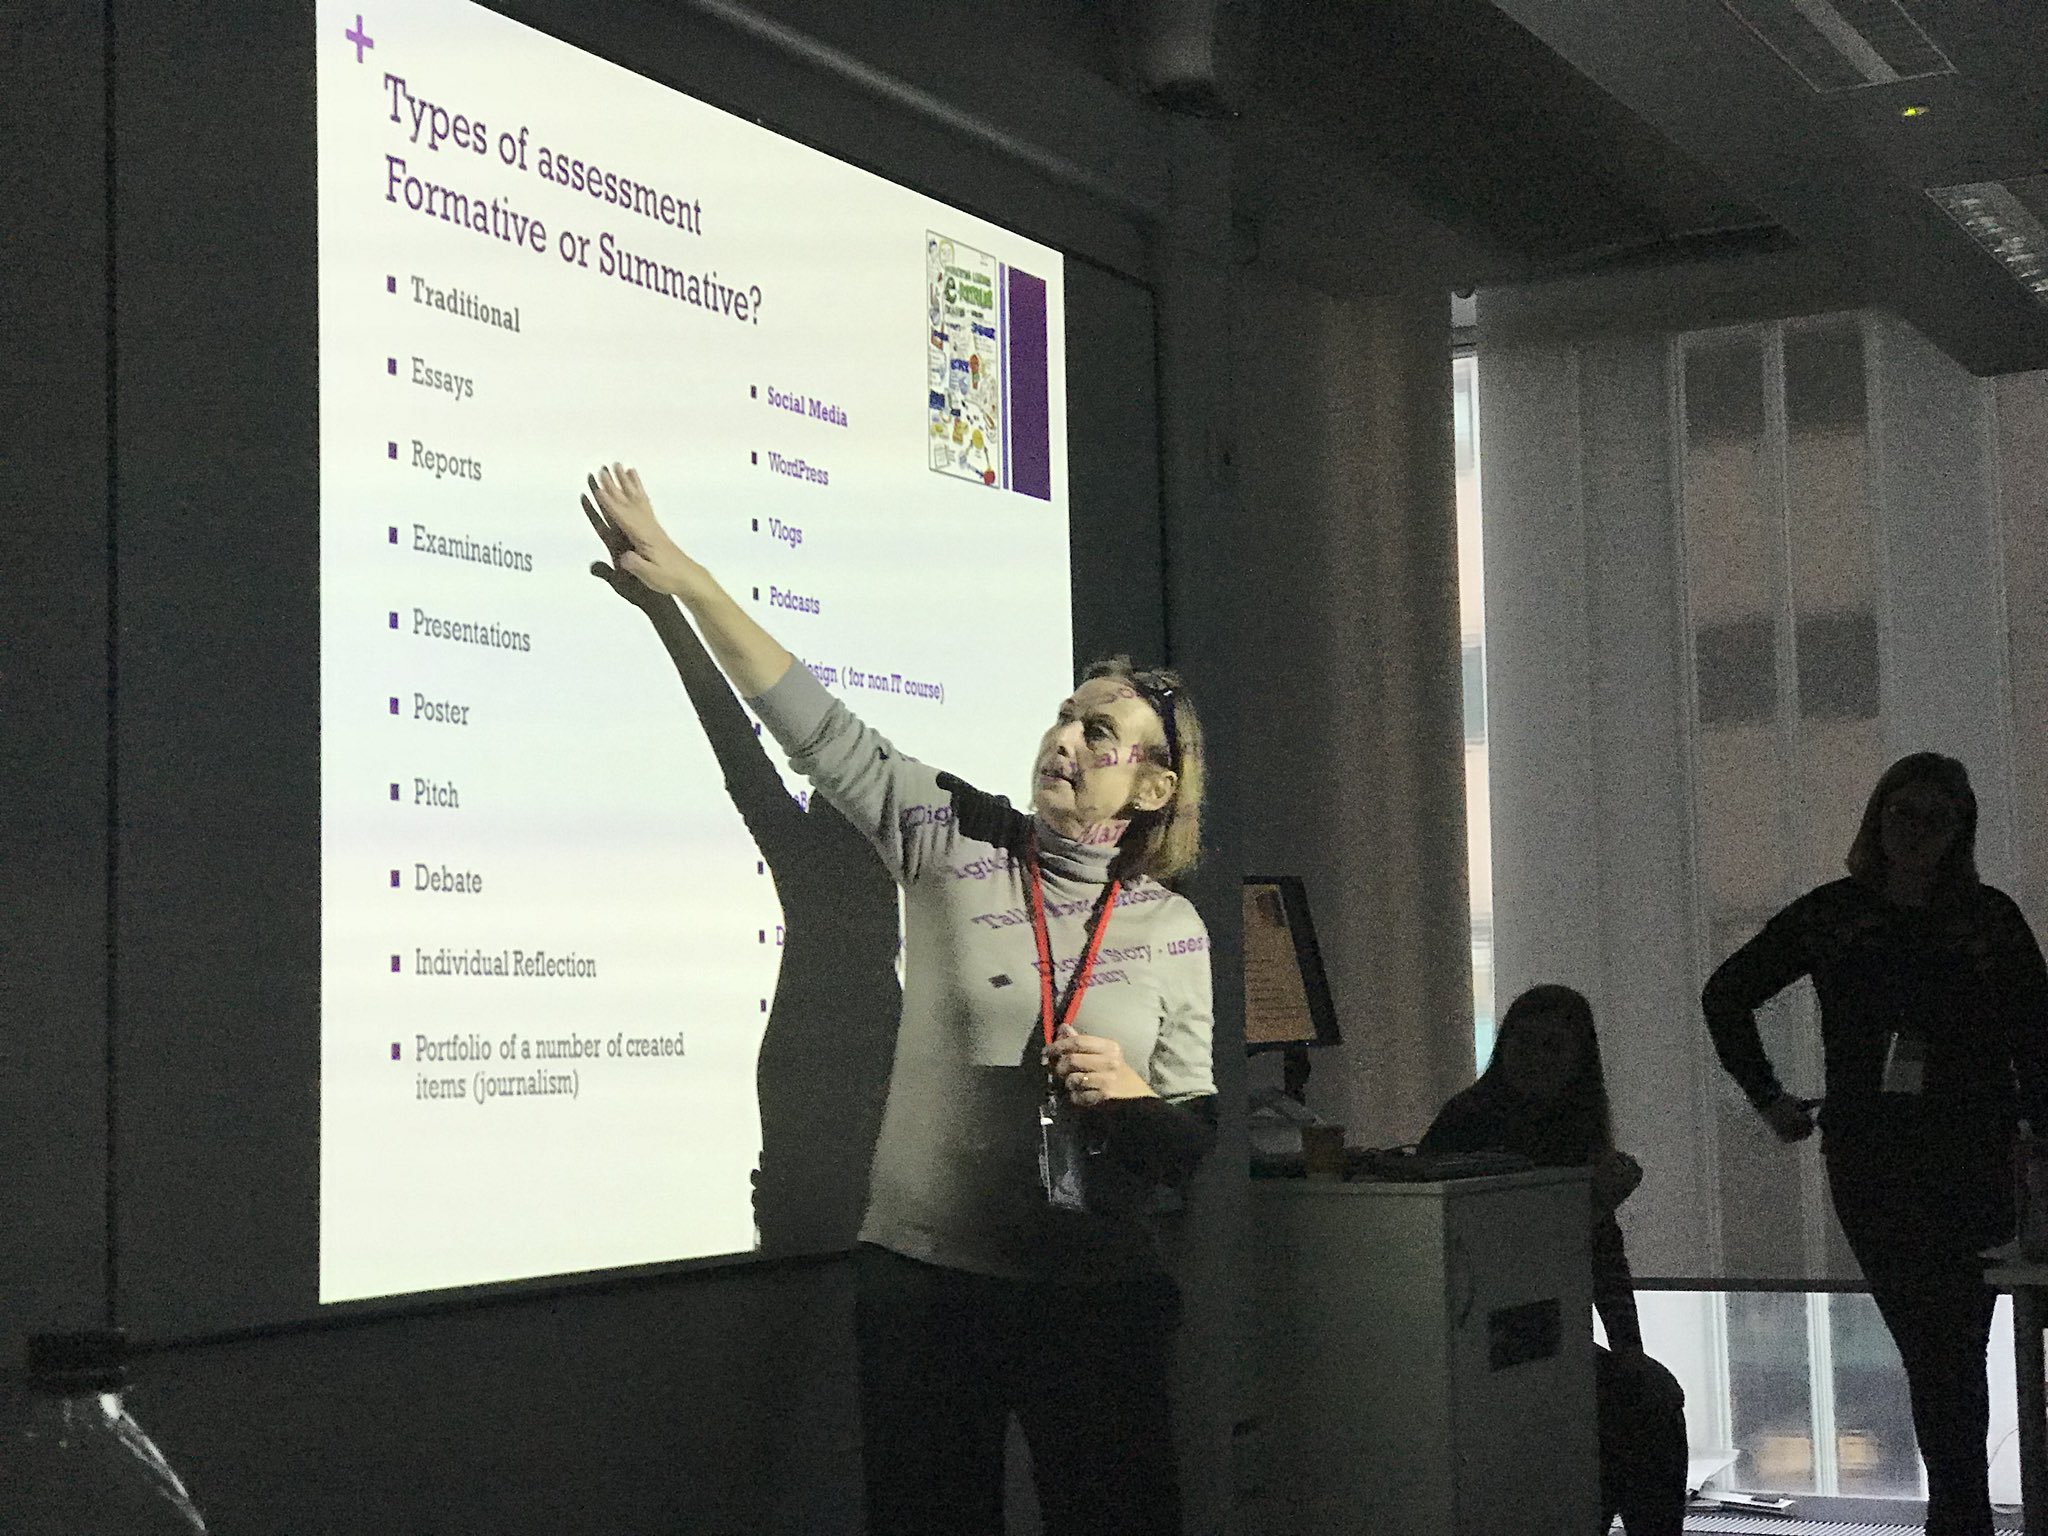 .@hilary_cunliffe talks about our reliance on traditional assessment tools #SocMedHE17 https://t.co/o81IEZy6nX